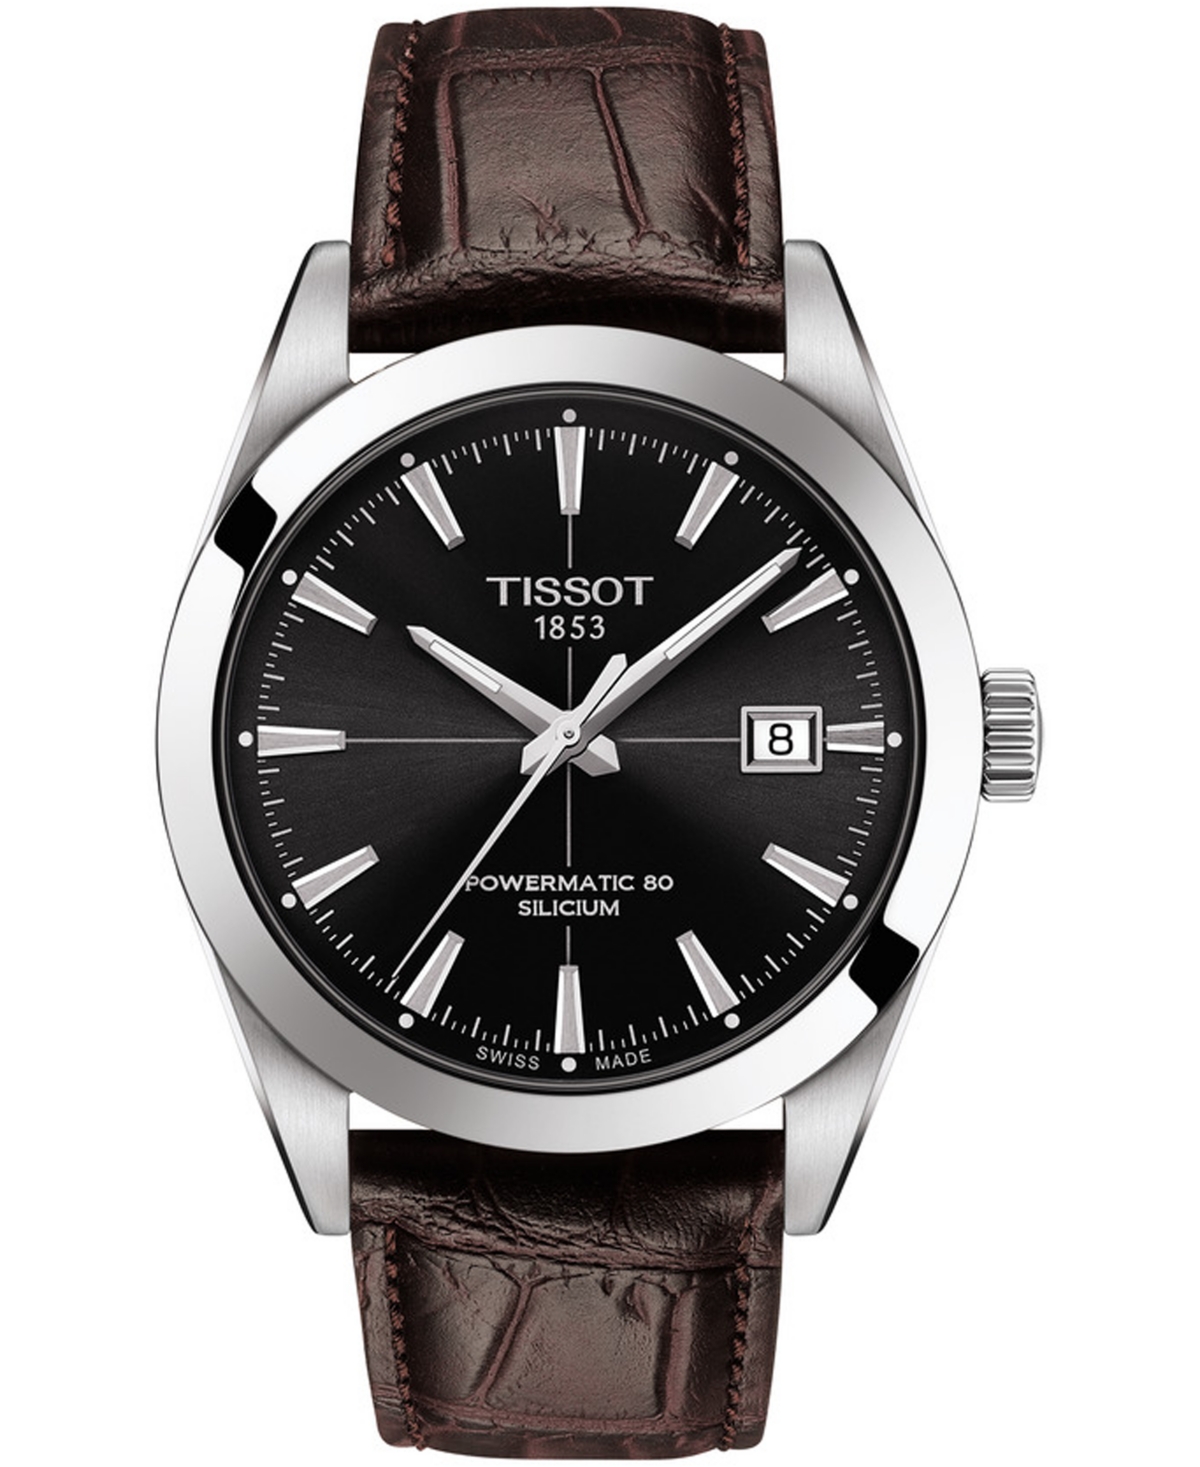 Tissot Men's Swiss Automatic Powermatic 80 Silicium Brown Leather Strap Watch 40mm In Black